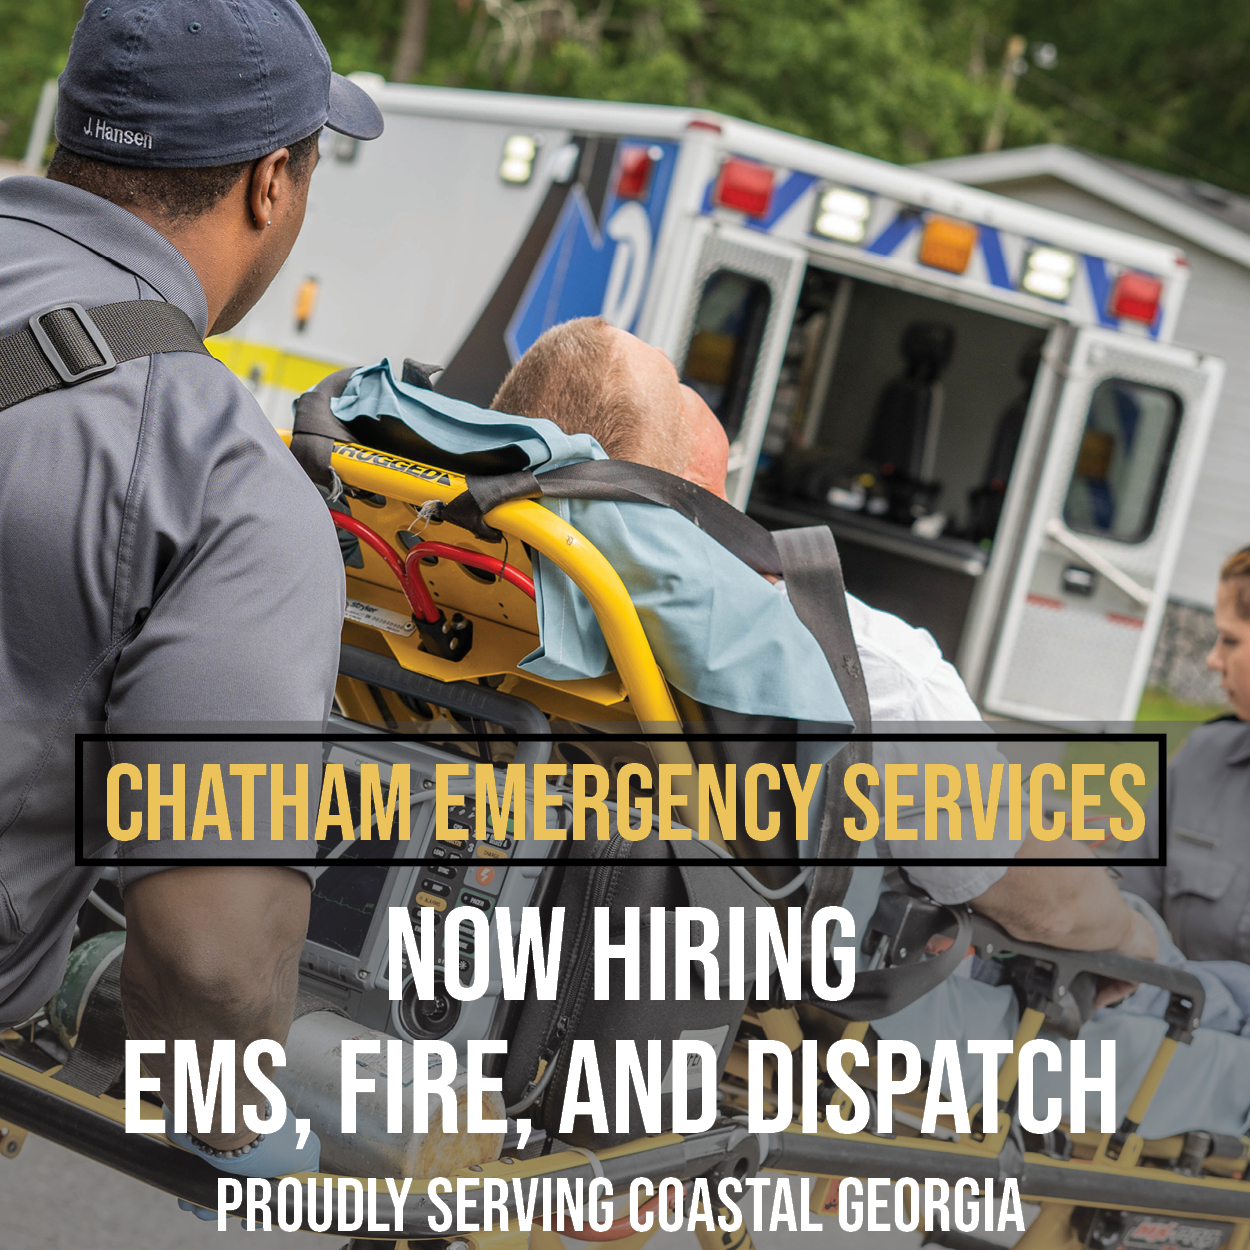 Chatham Emergency Services